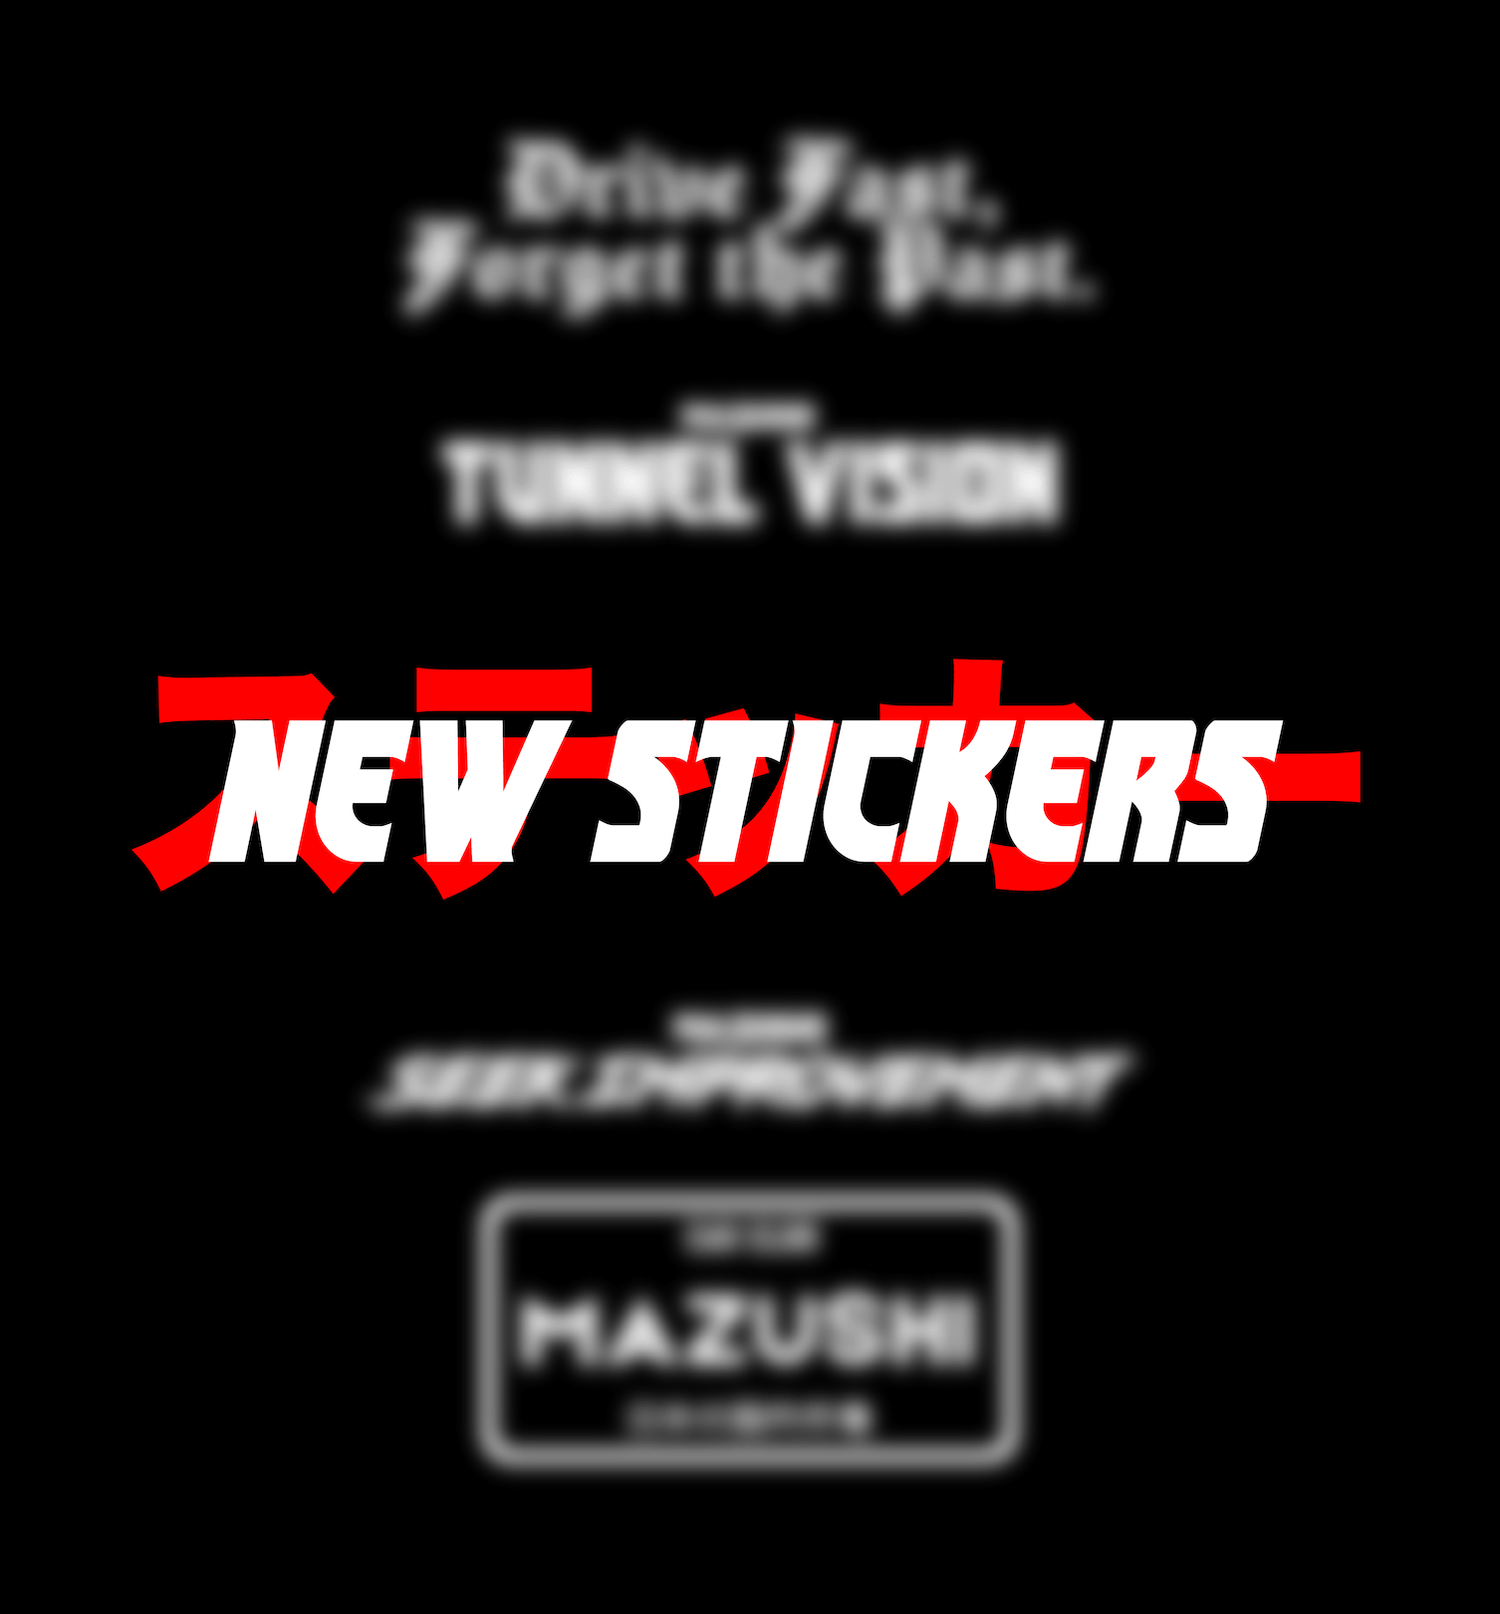 OUR FIRST STICKERS! - Mazushi